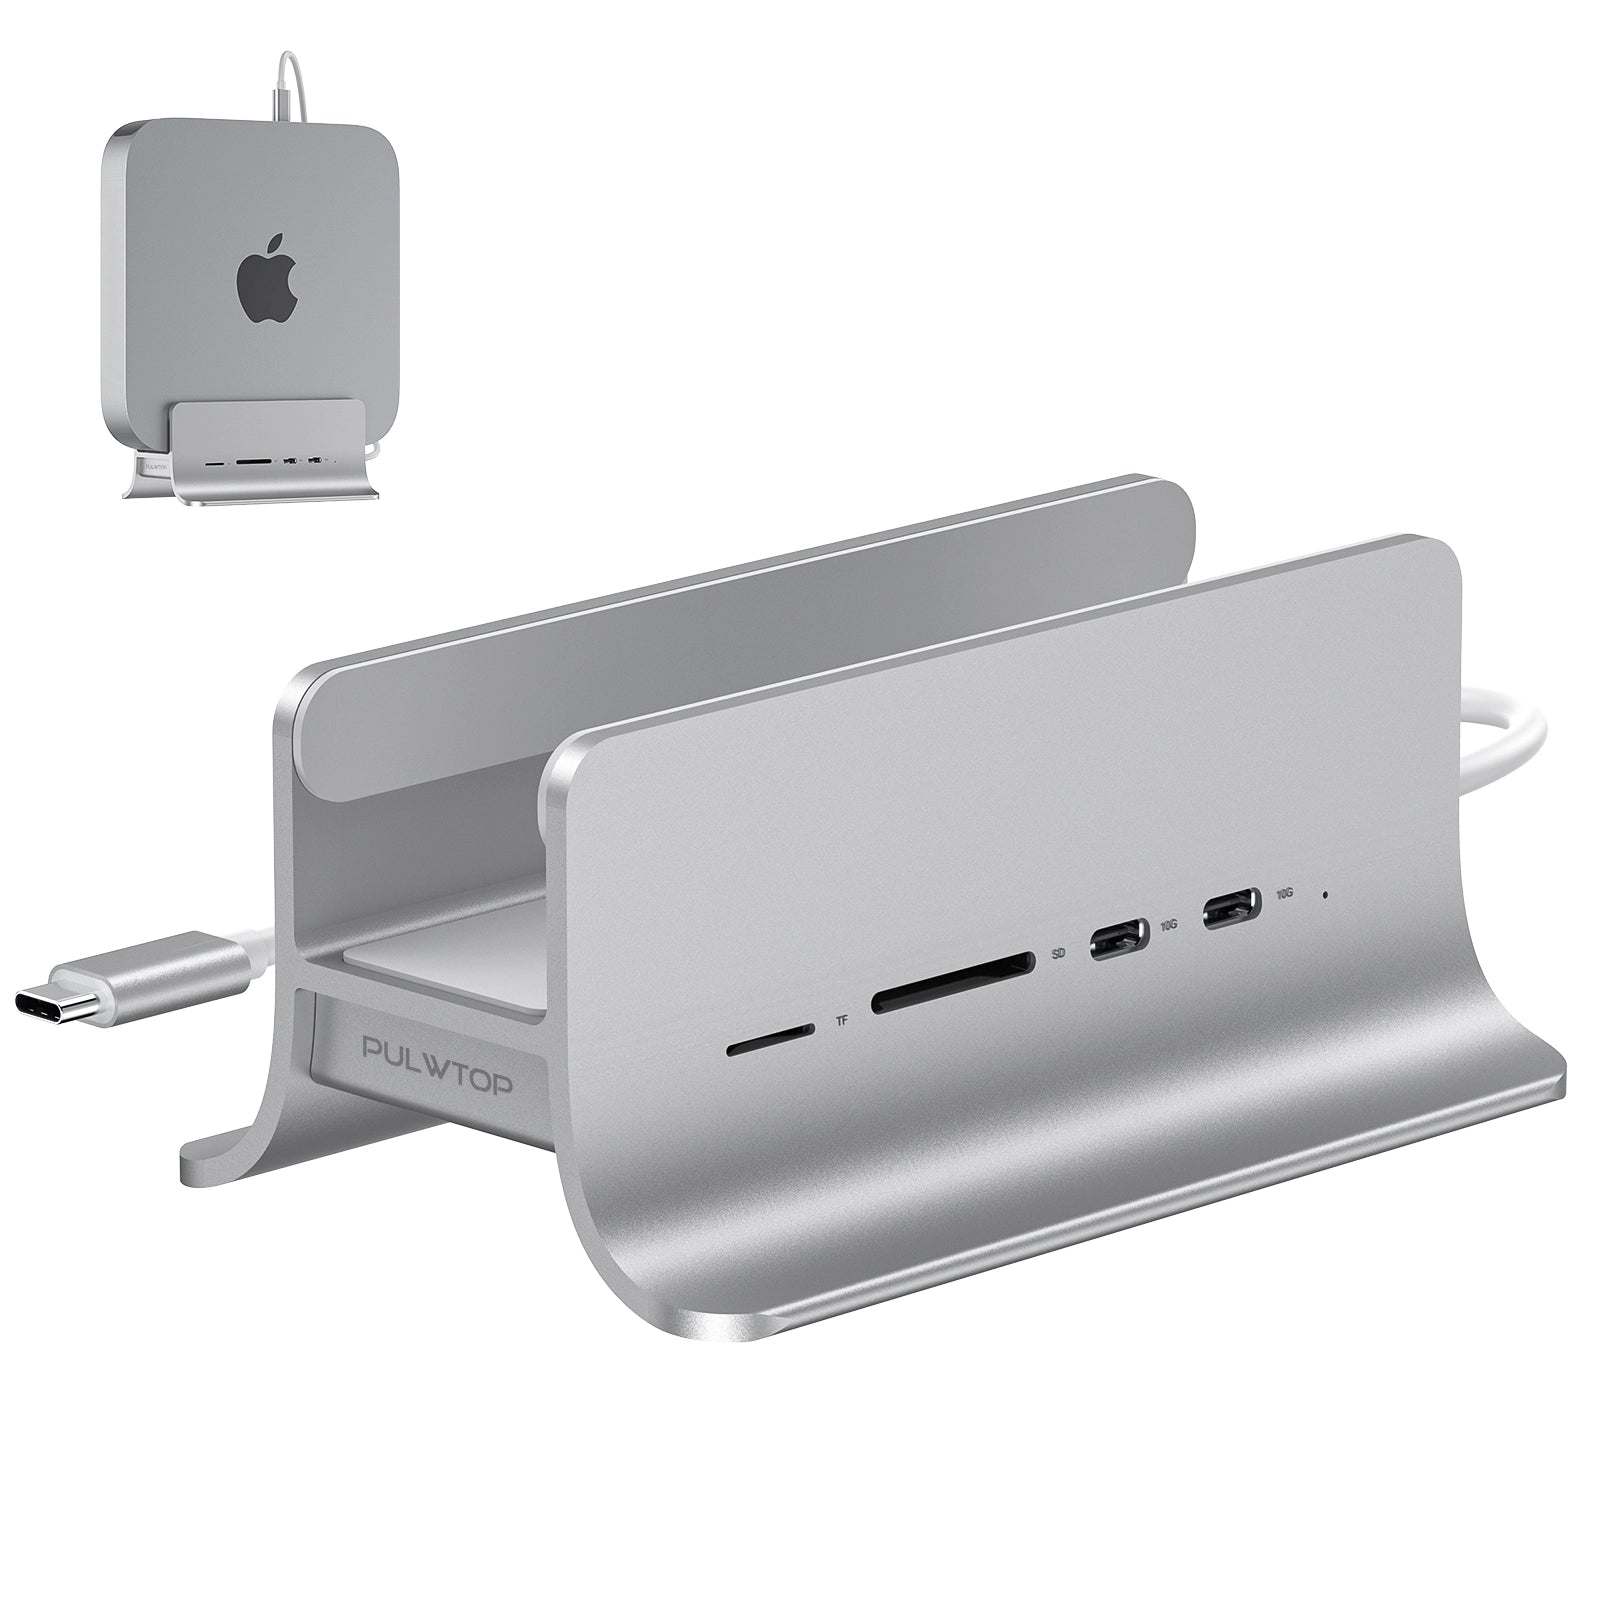 PULWTOP USB C Hub for Mac Mini, 5 in 1USB Hub Adapter Support M.2 NVMe SSD Expand(Not Included)